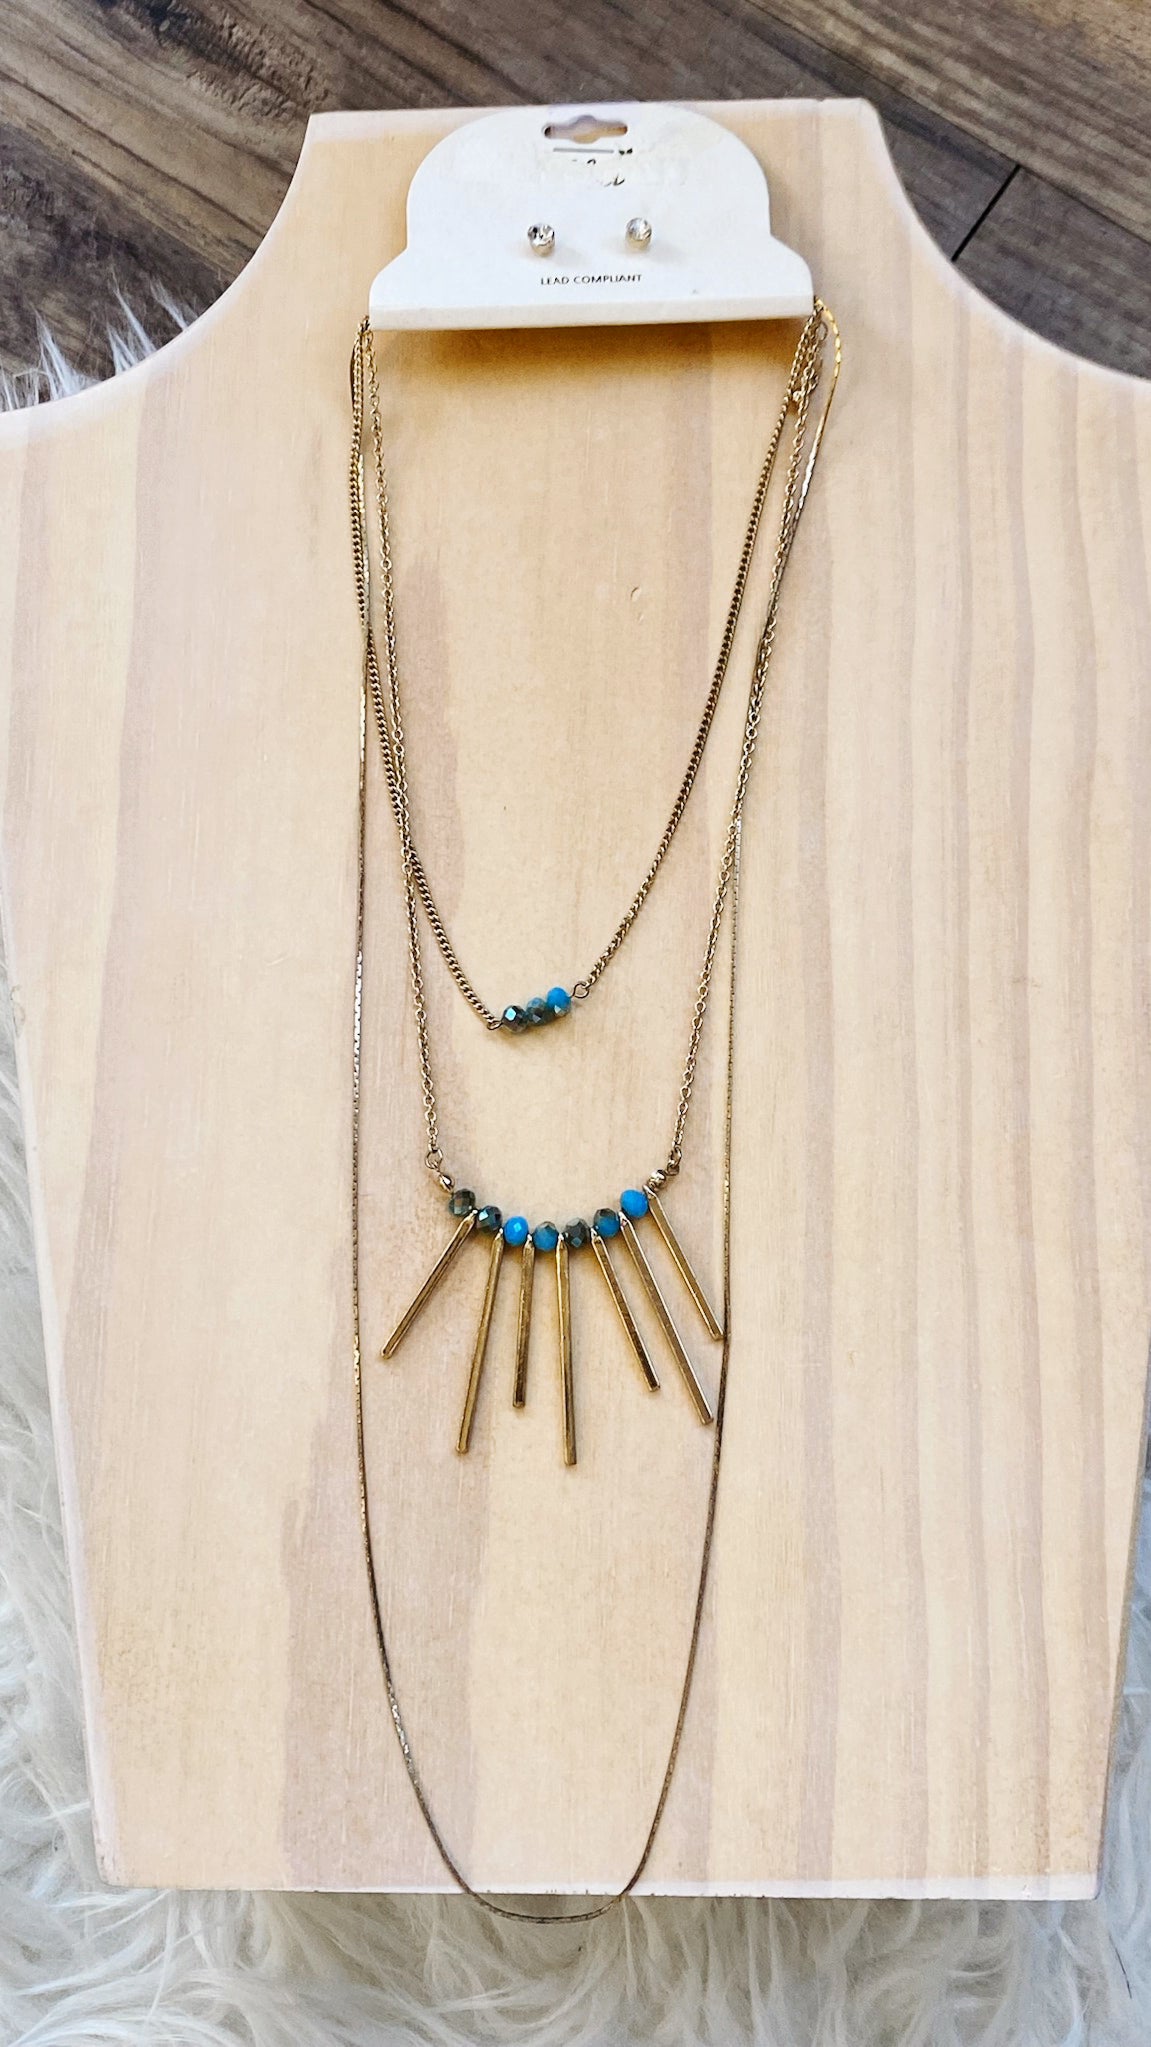 Necklace S15879 10.22